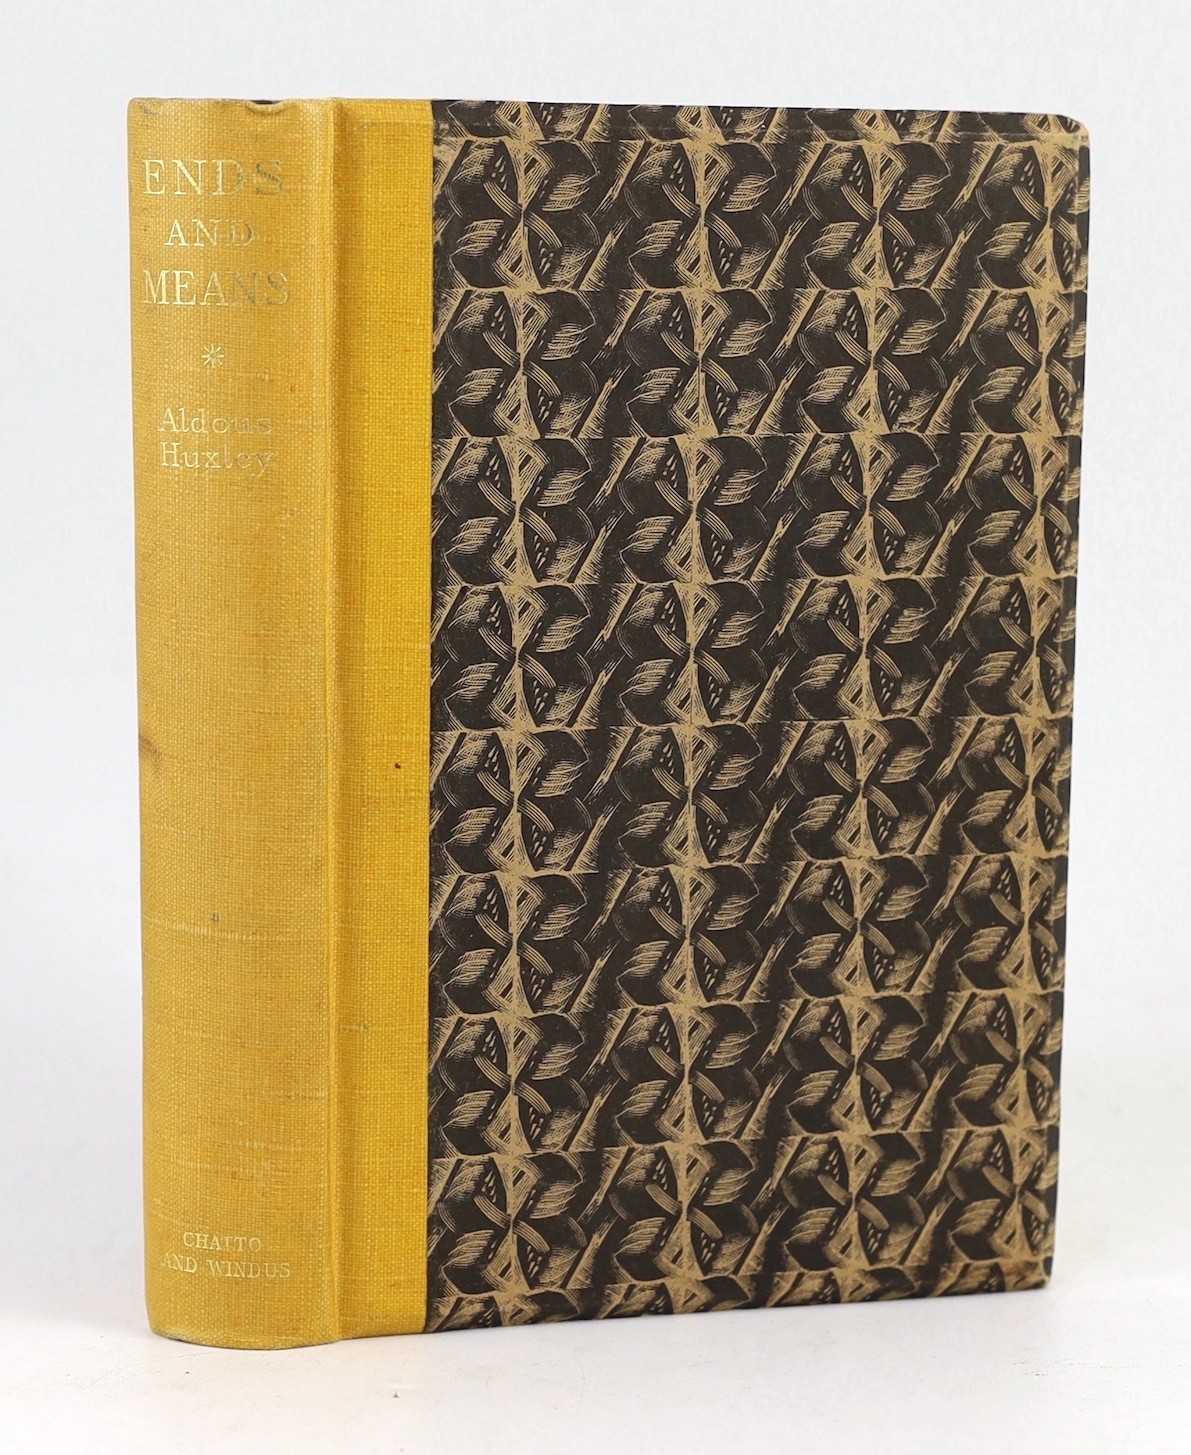 Huxley, Aldous - Ends and Means. An Enquiry into the Nature of Ideals and into the Methods Employed for their Realization, 1st edition, number 115 of 160, signed by the author, 8vo, quarter yellow cloth with patterned bo